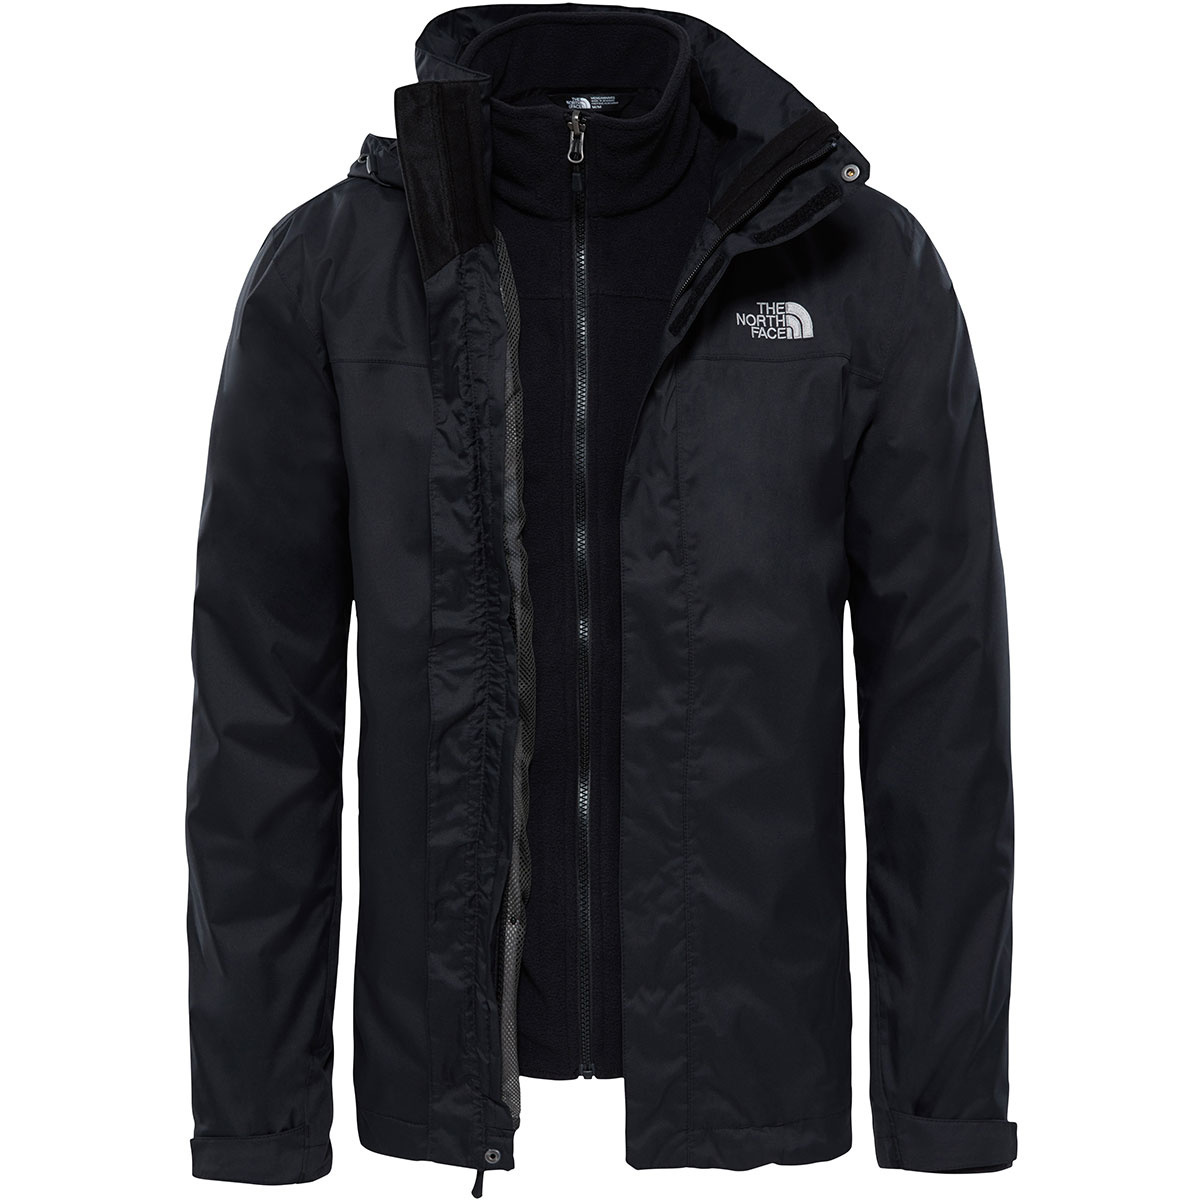 The North Face Herren Evolve II Triclimate Jacke von The North Face